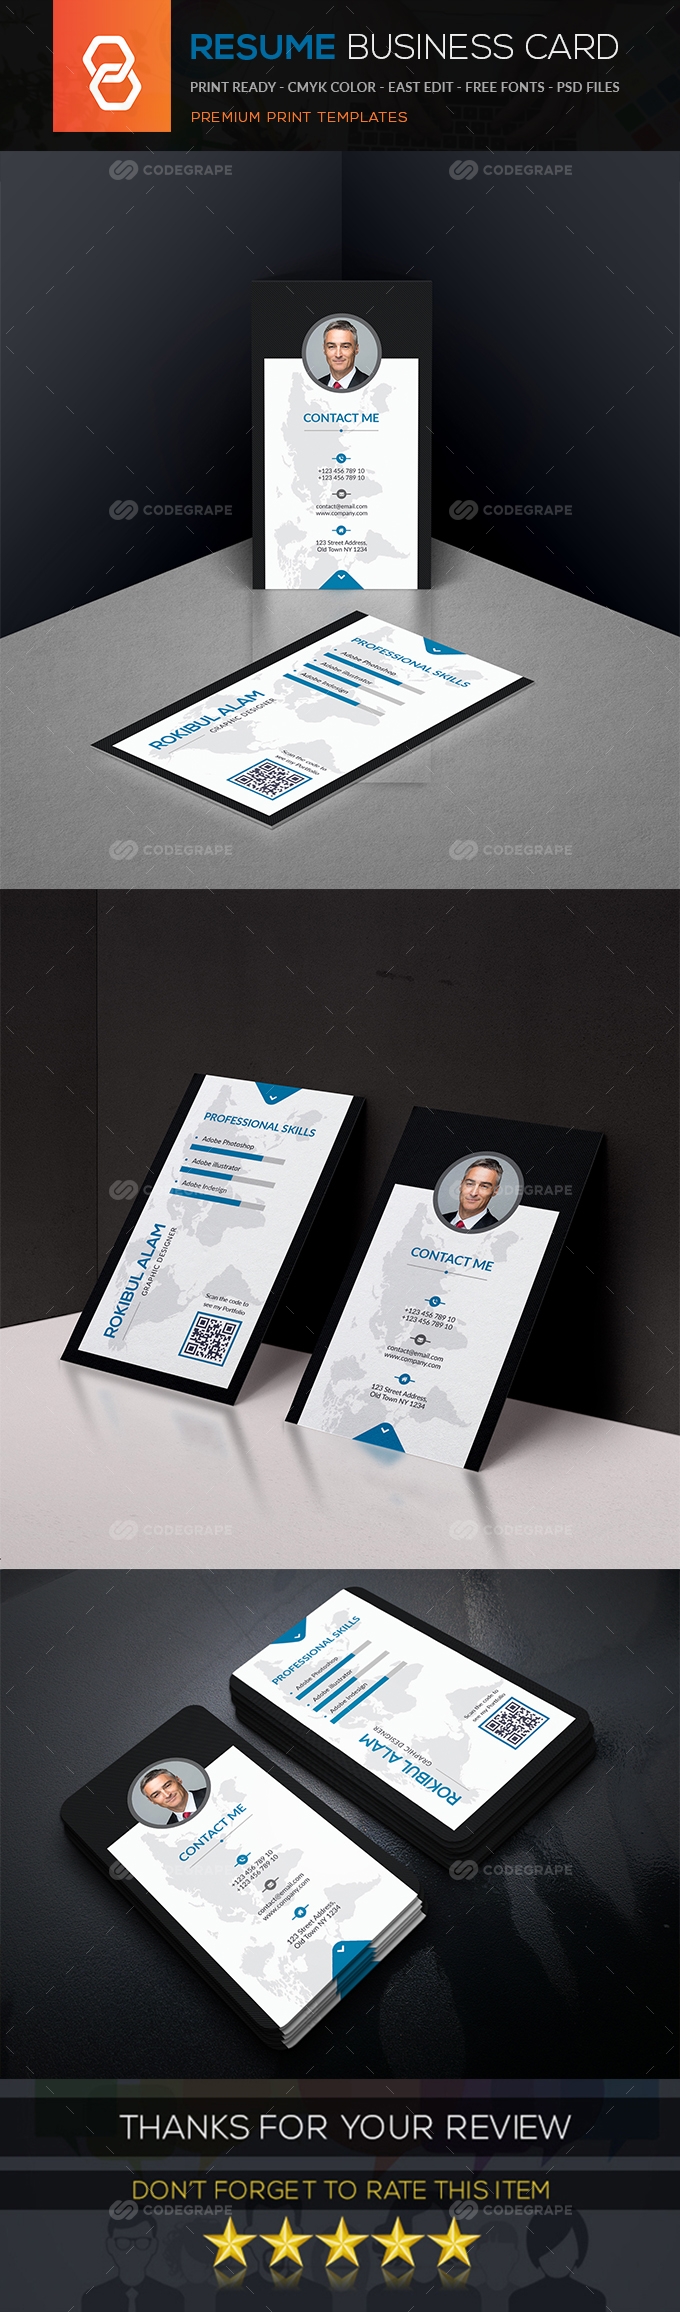 Resume Business Card